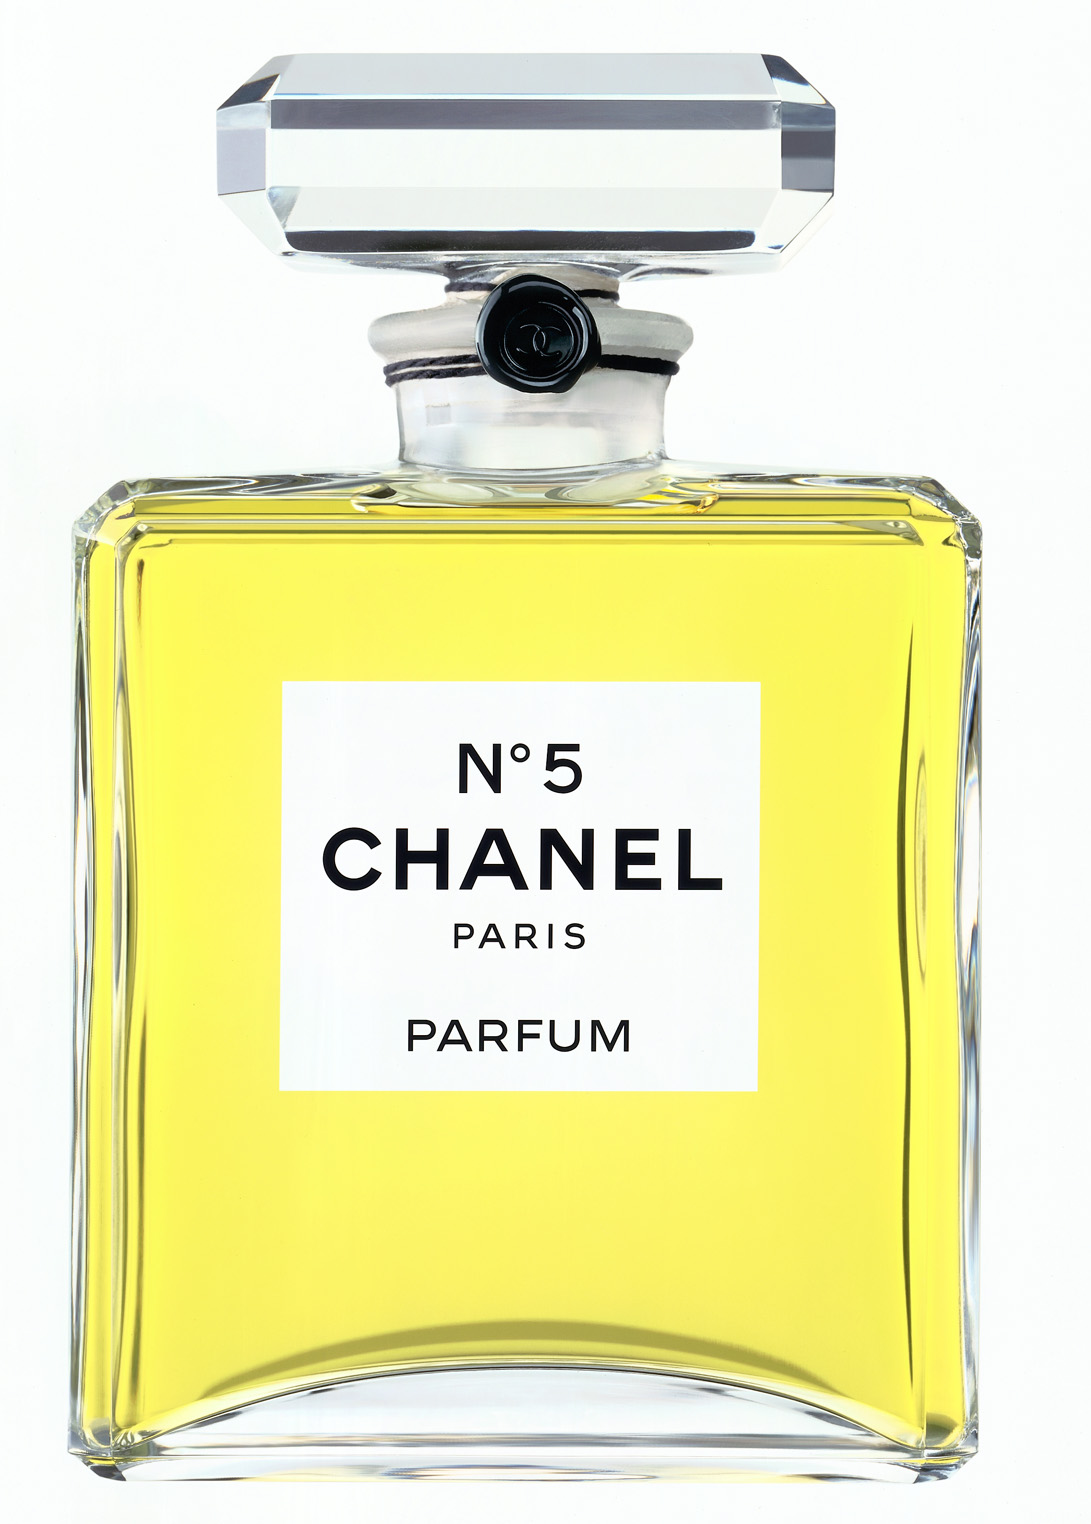 The 7 Fragrances Every Woman In Her 20s Should Own